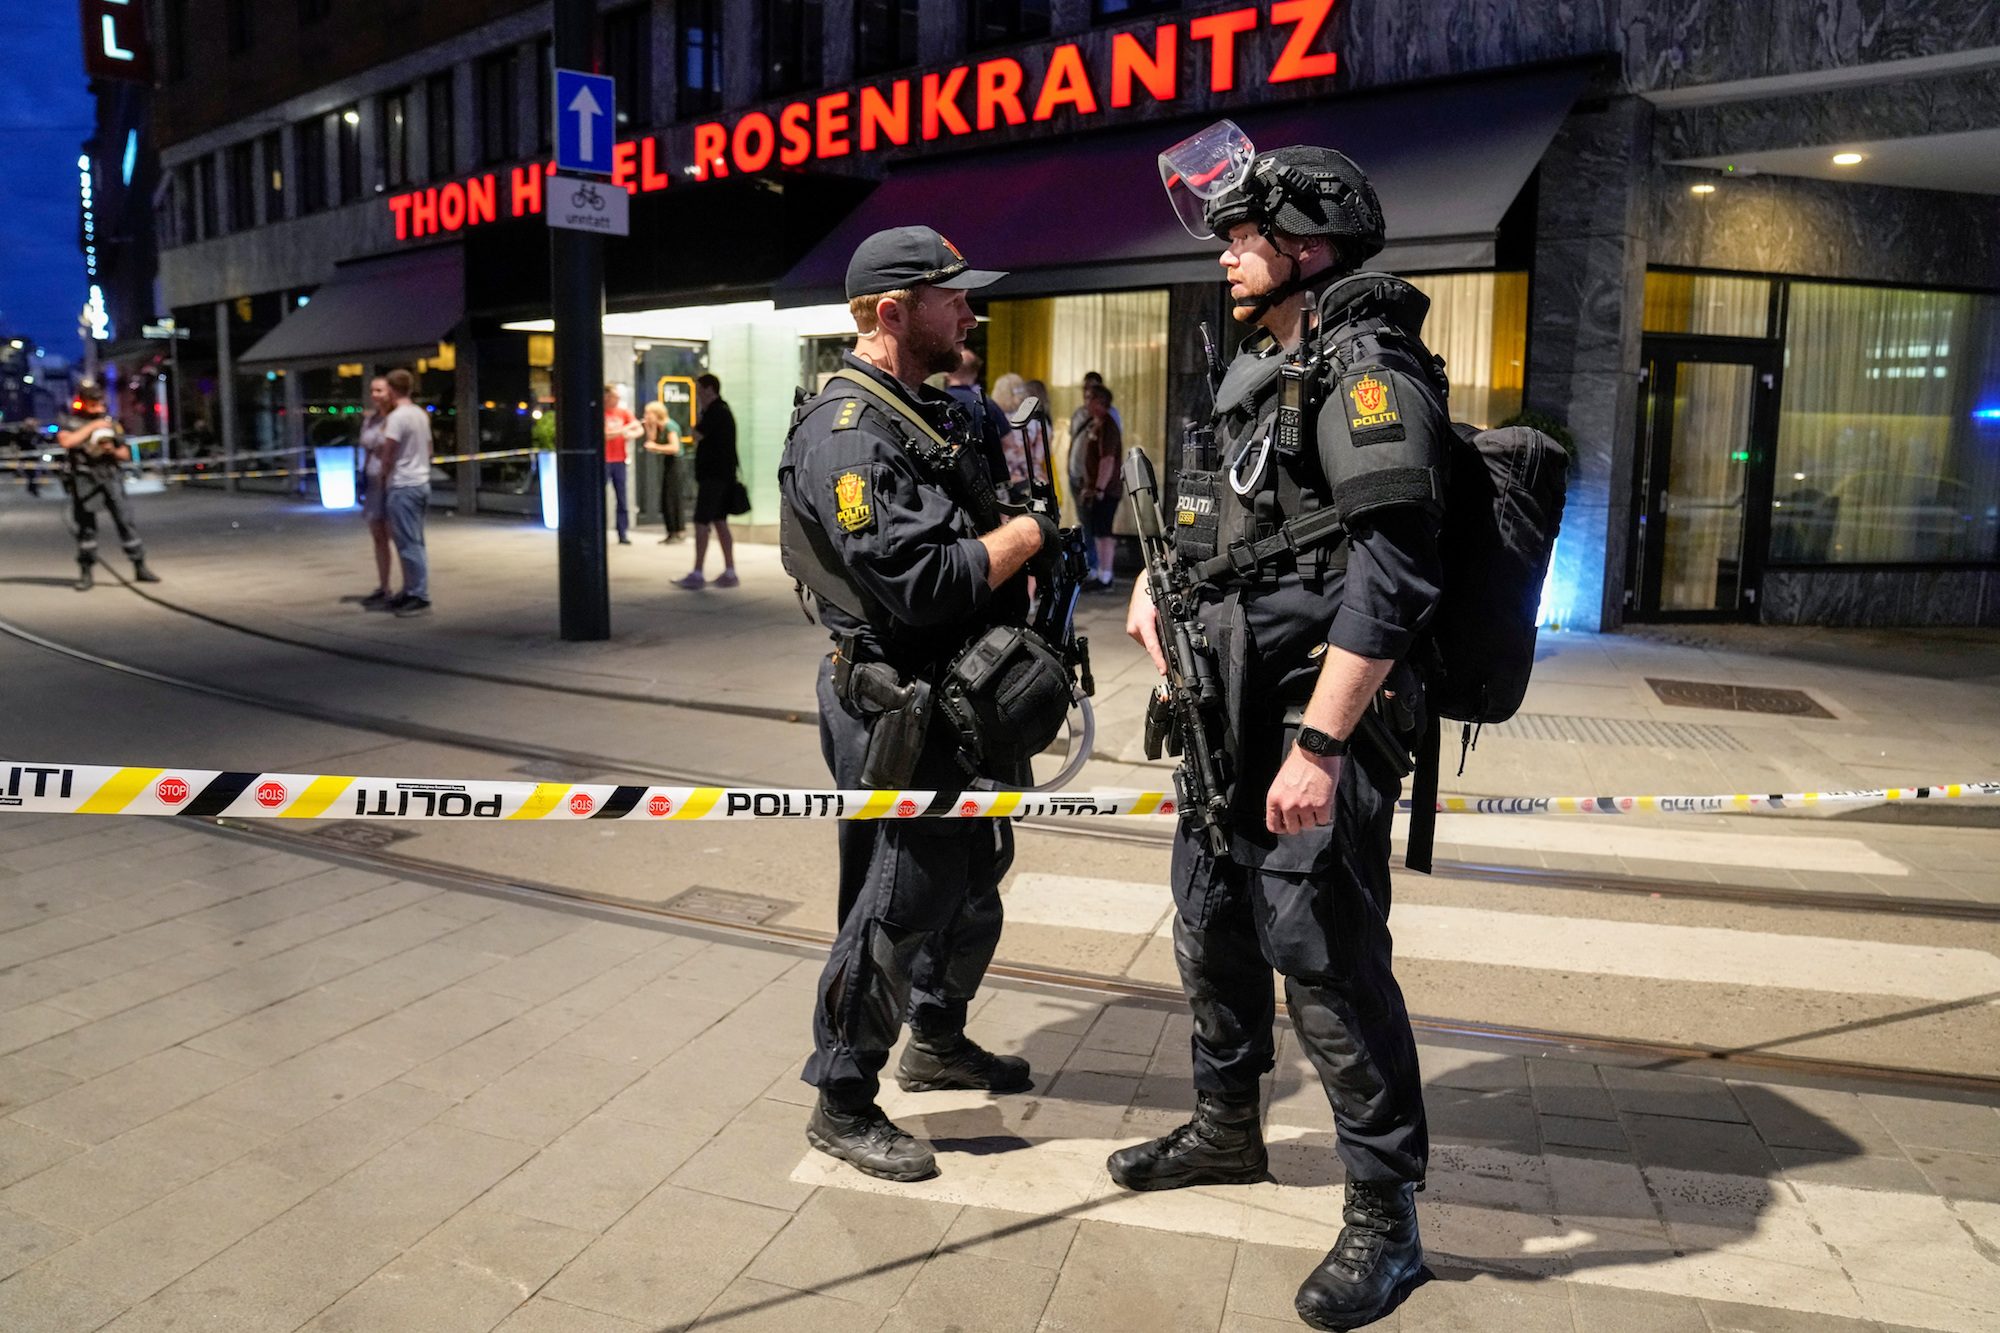 2 dead, 14 wounded in Norway nightclub shooting – police